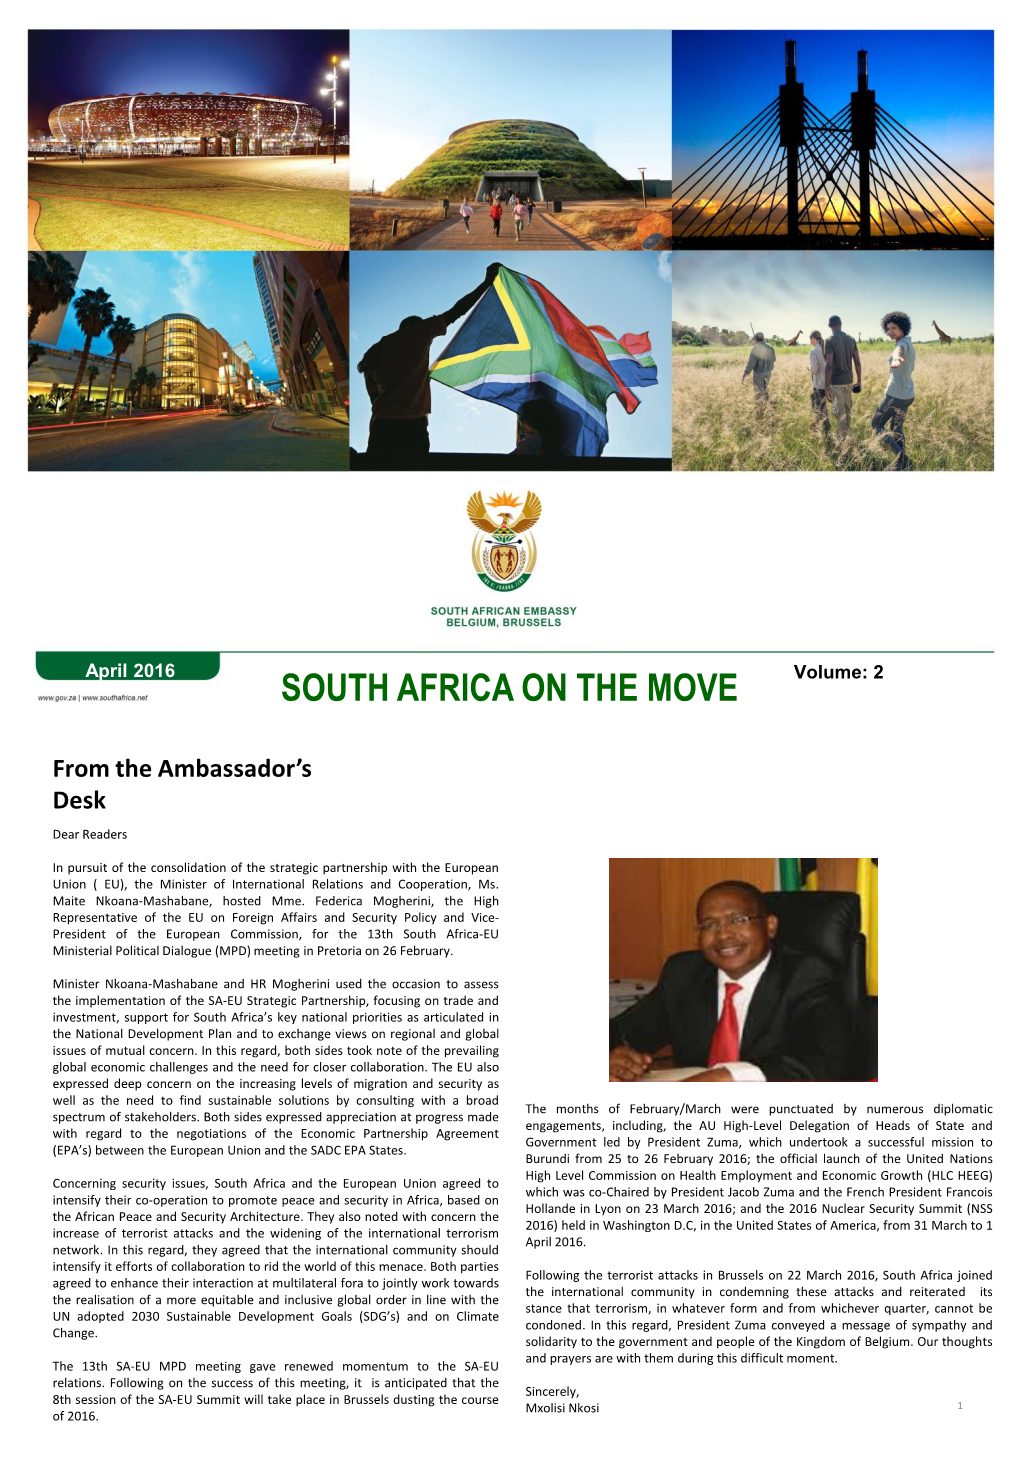 April 2016 Edition of South Africa on the Move